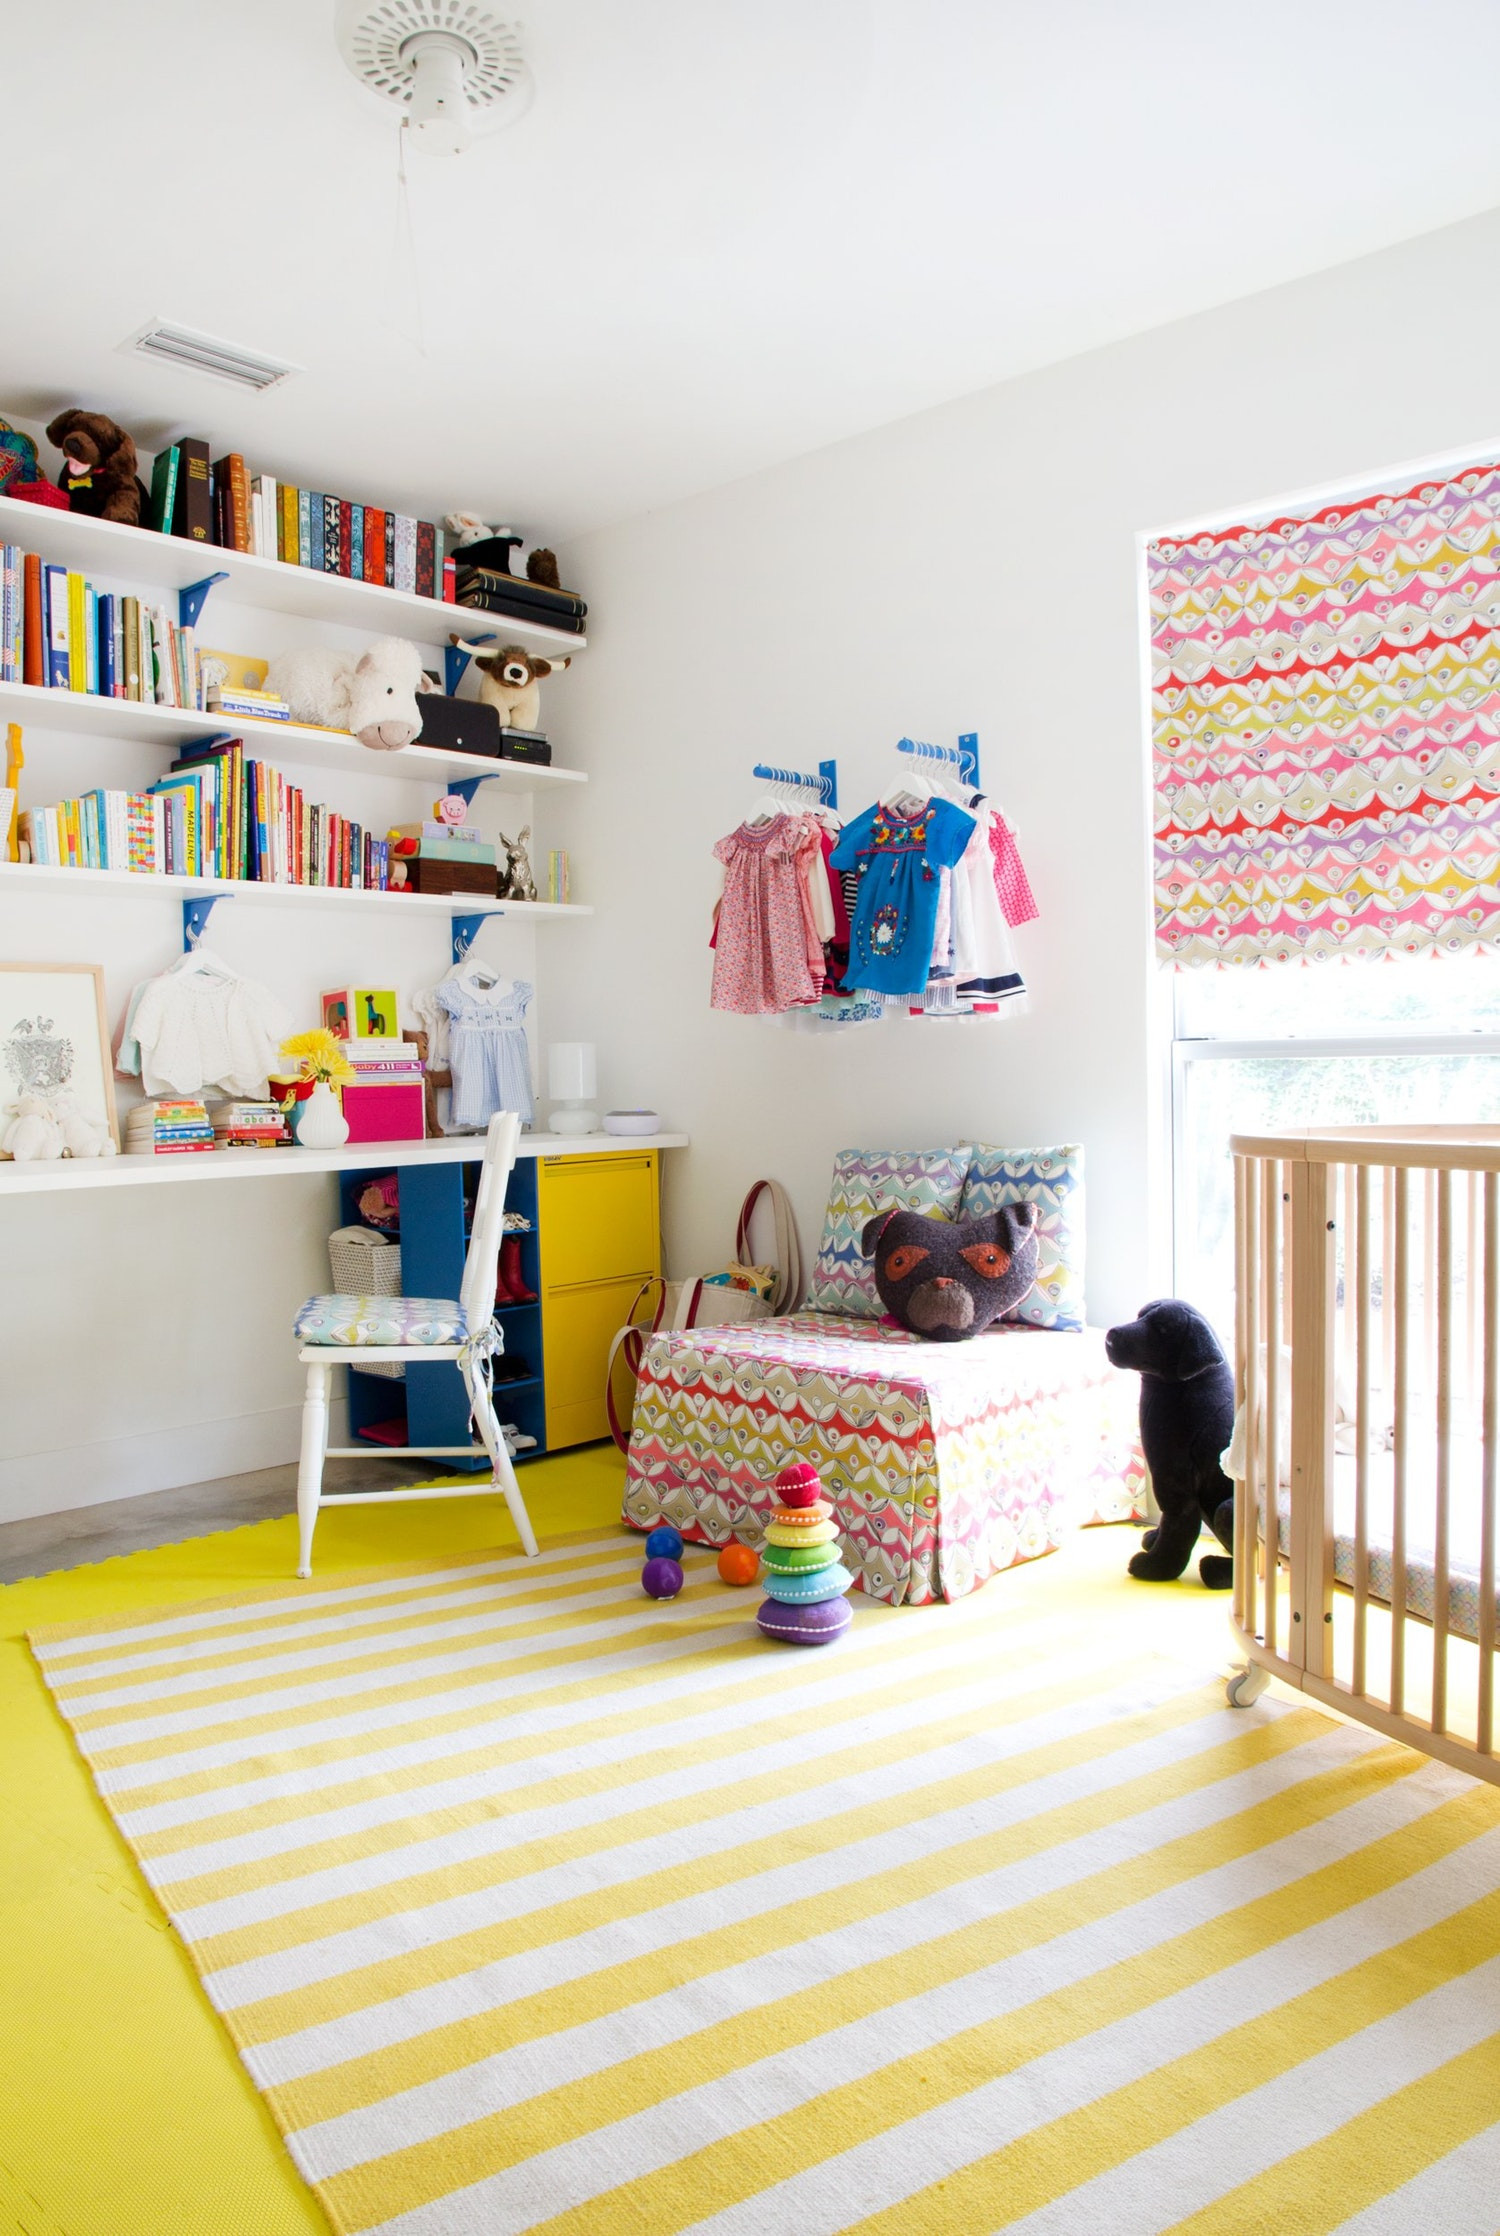 Storage Ideas For Kids Room
 30 Smart Storage Ideas for Small Spaces